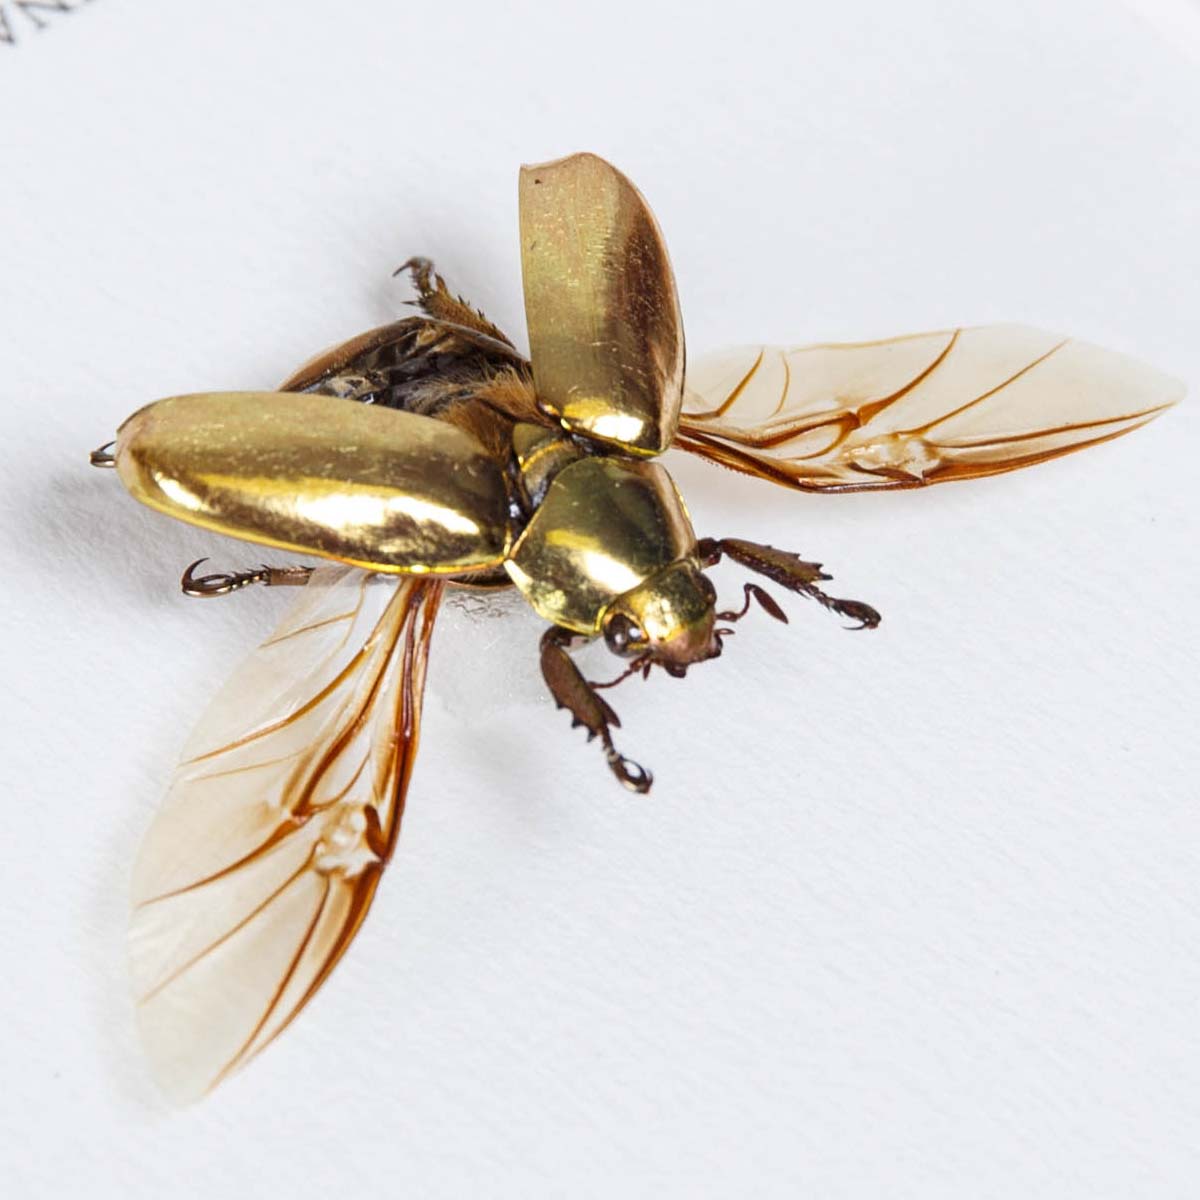 Golden Scarab Beetle With Wings Spread in Box Frame (Chrysina resplendens)